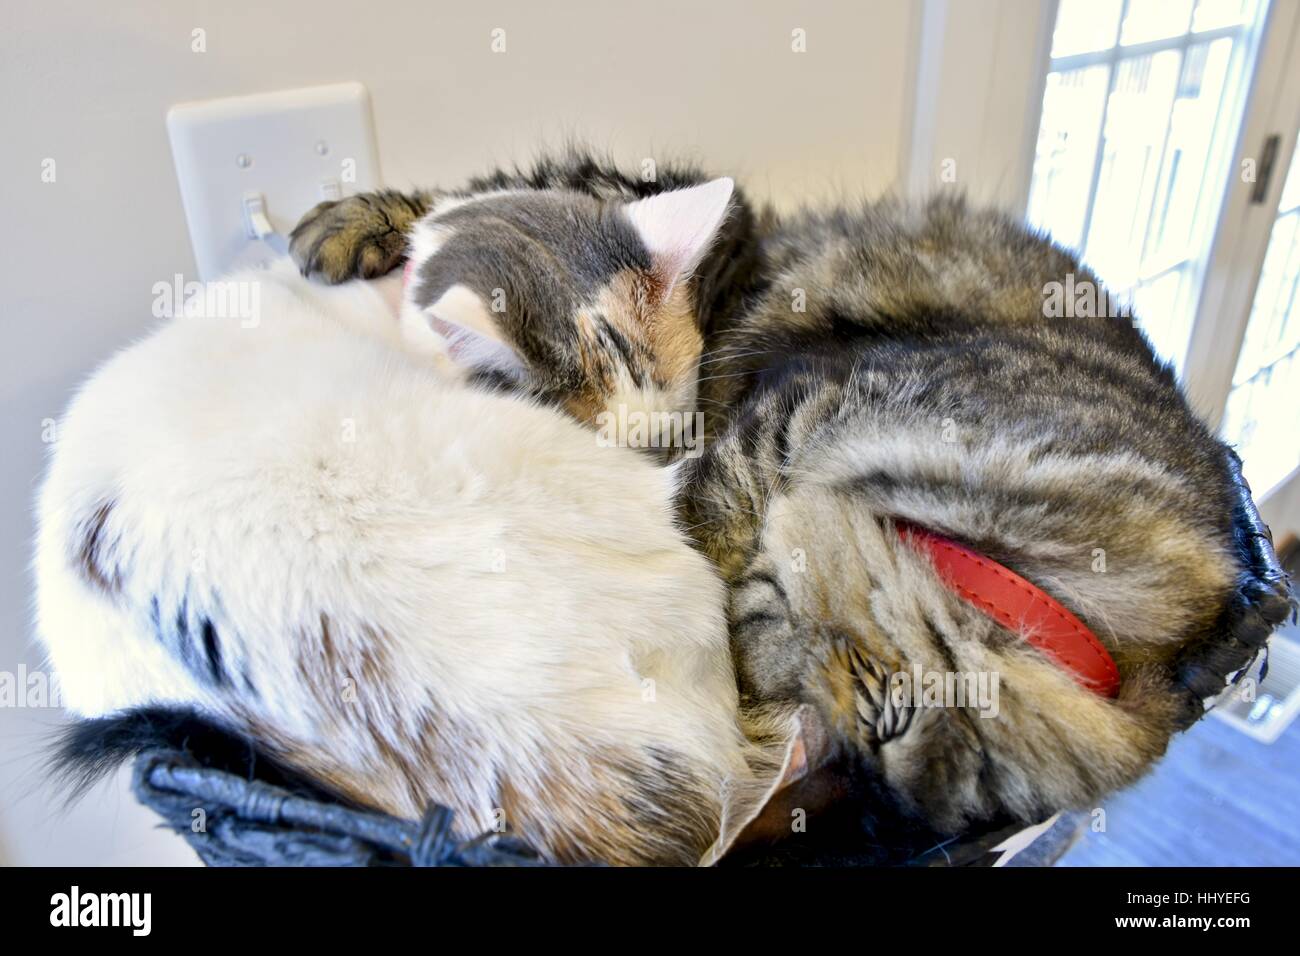 Two cute cats curled up and snuggling together at the top of their cat house Stock Photo